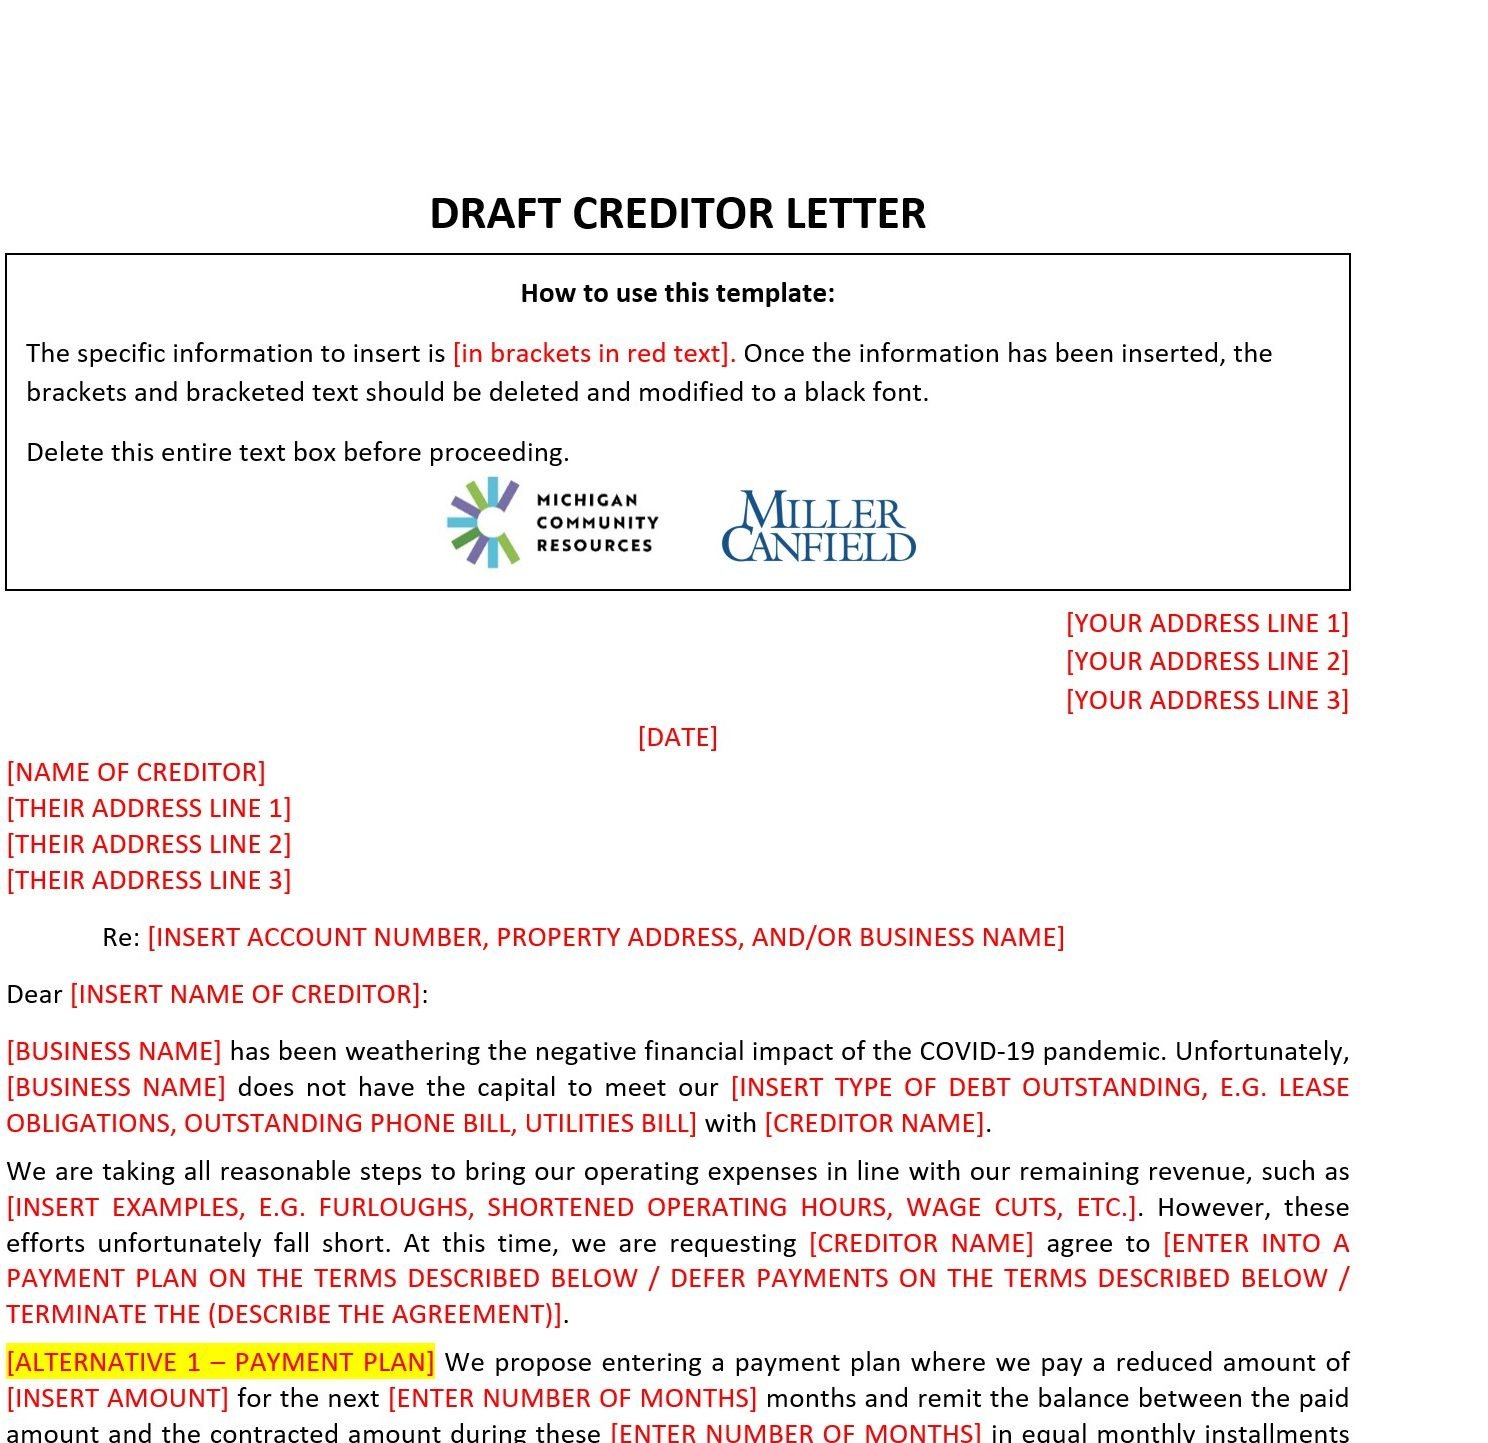 Preview Creditor Letter